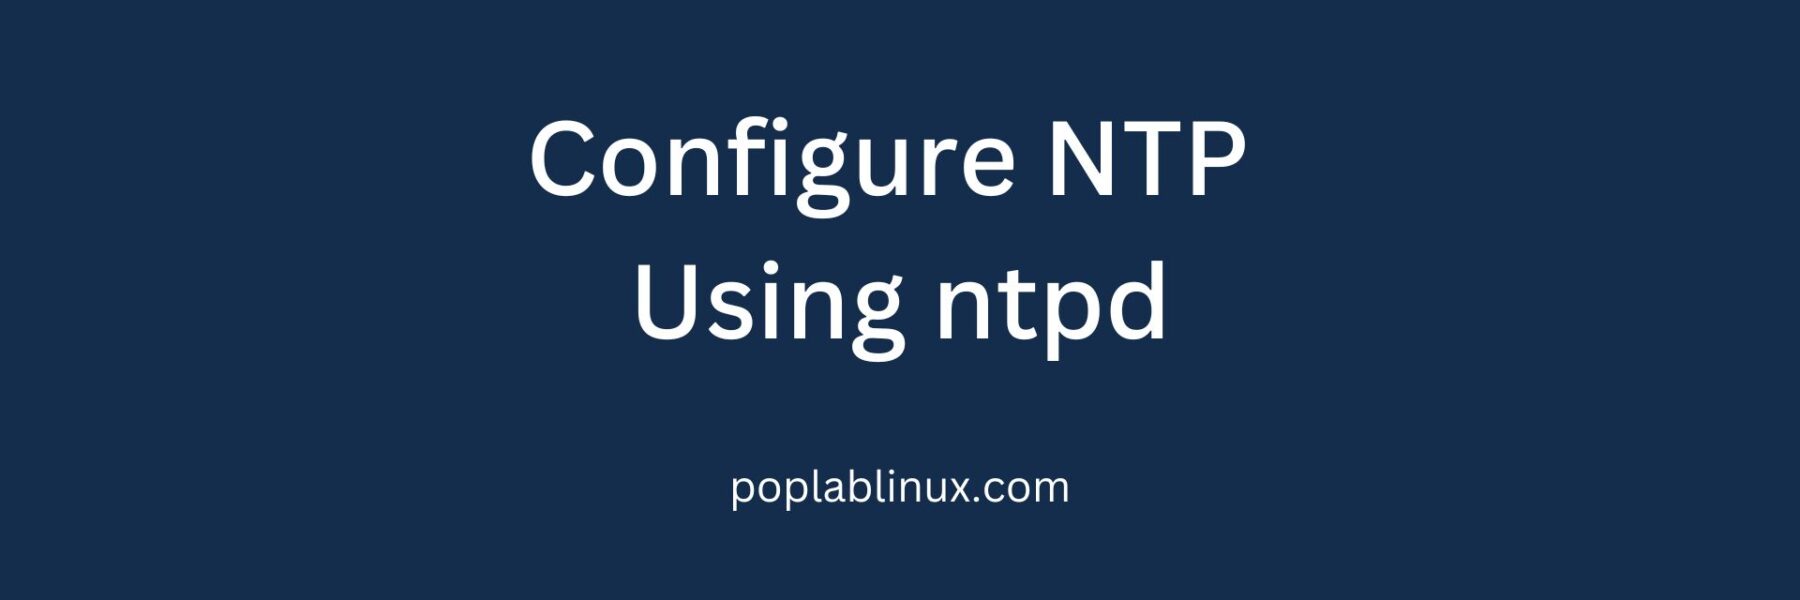 Configure NTP Using ntpd